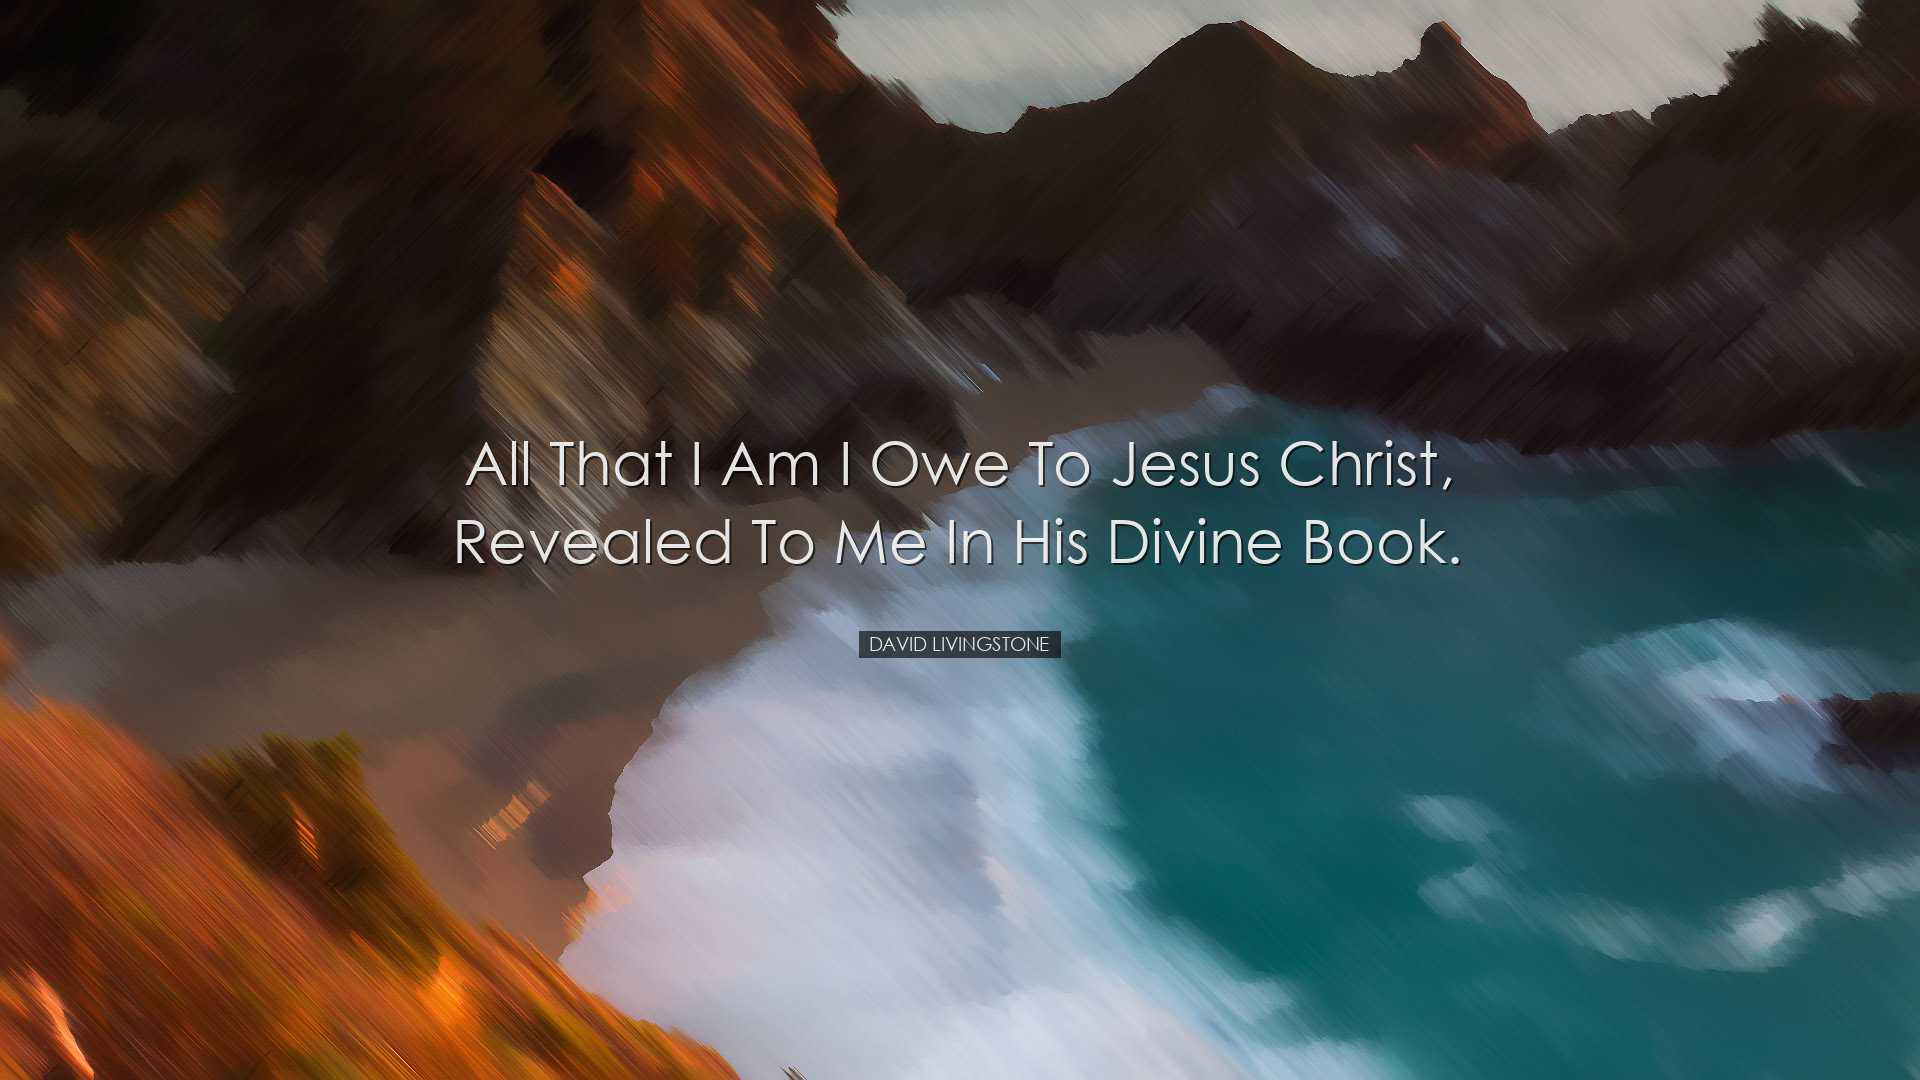 All that I am I owe to Jesus Christ, revealed to me in His divine